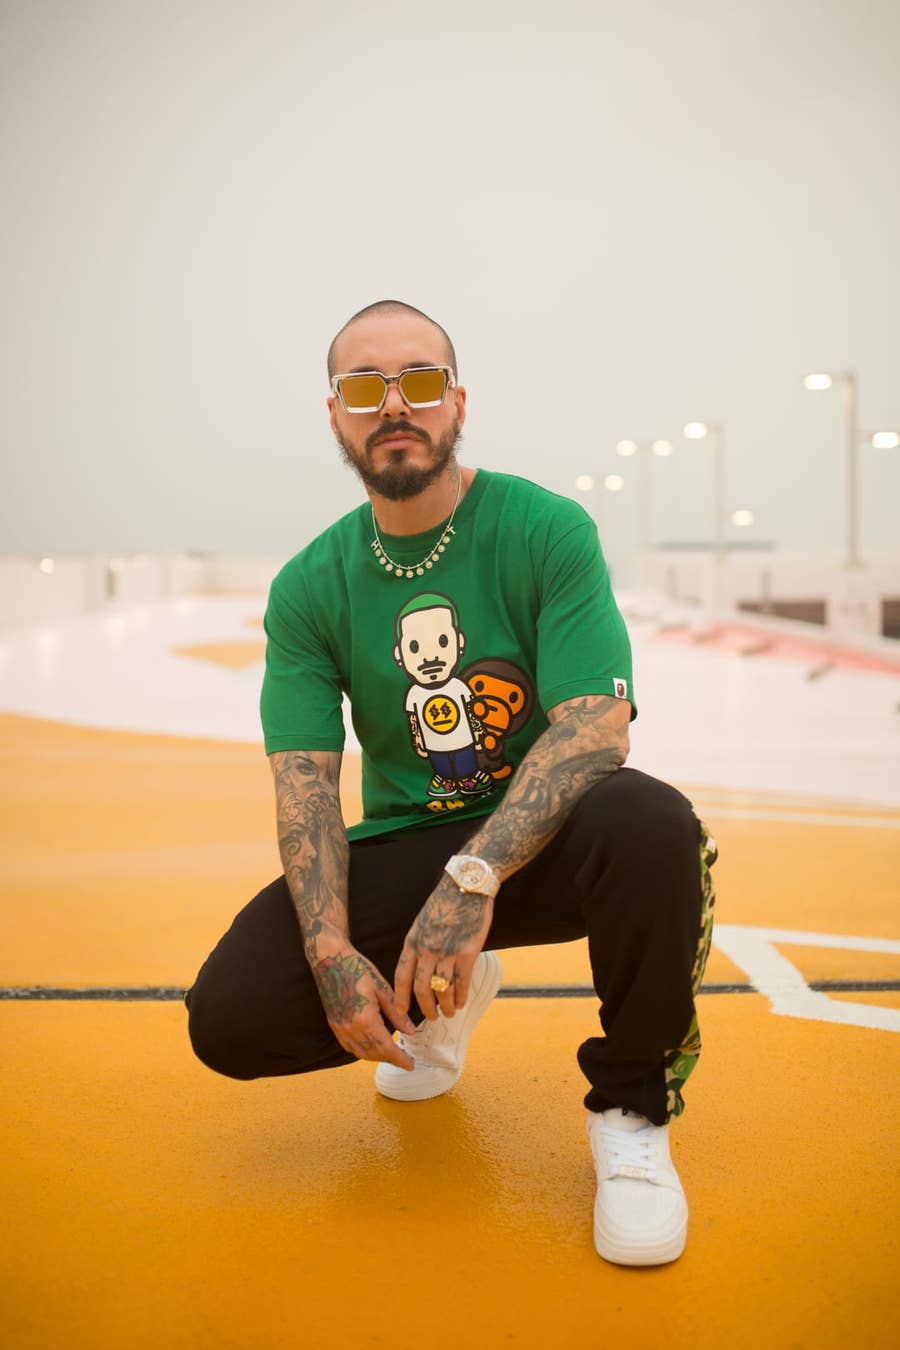 J Balvin and BAPE Unveil New Collab Collection